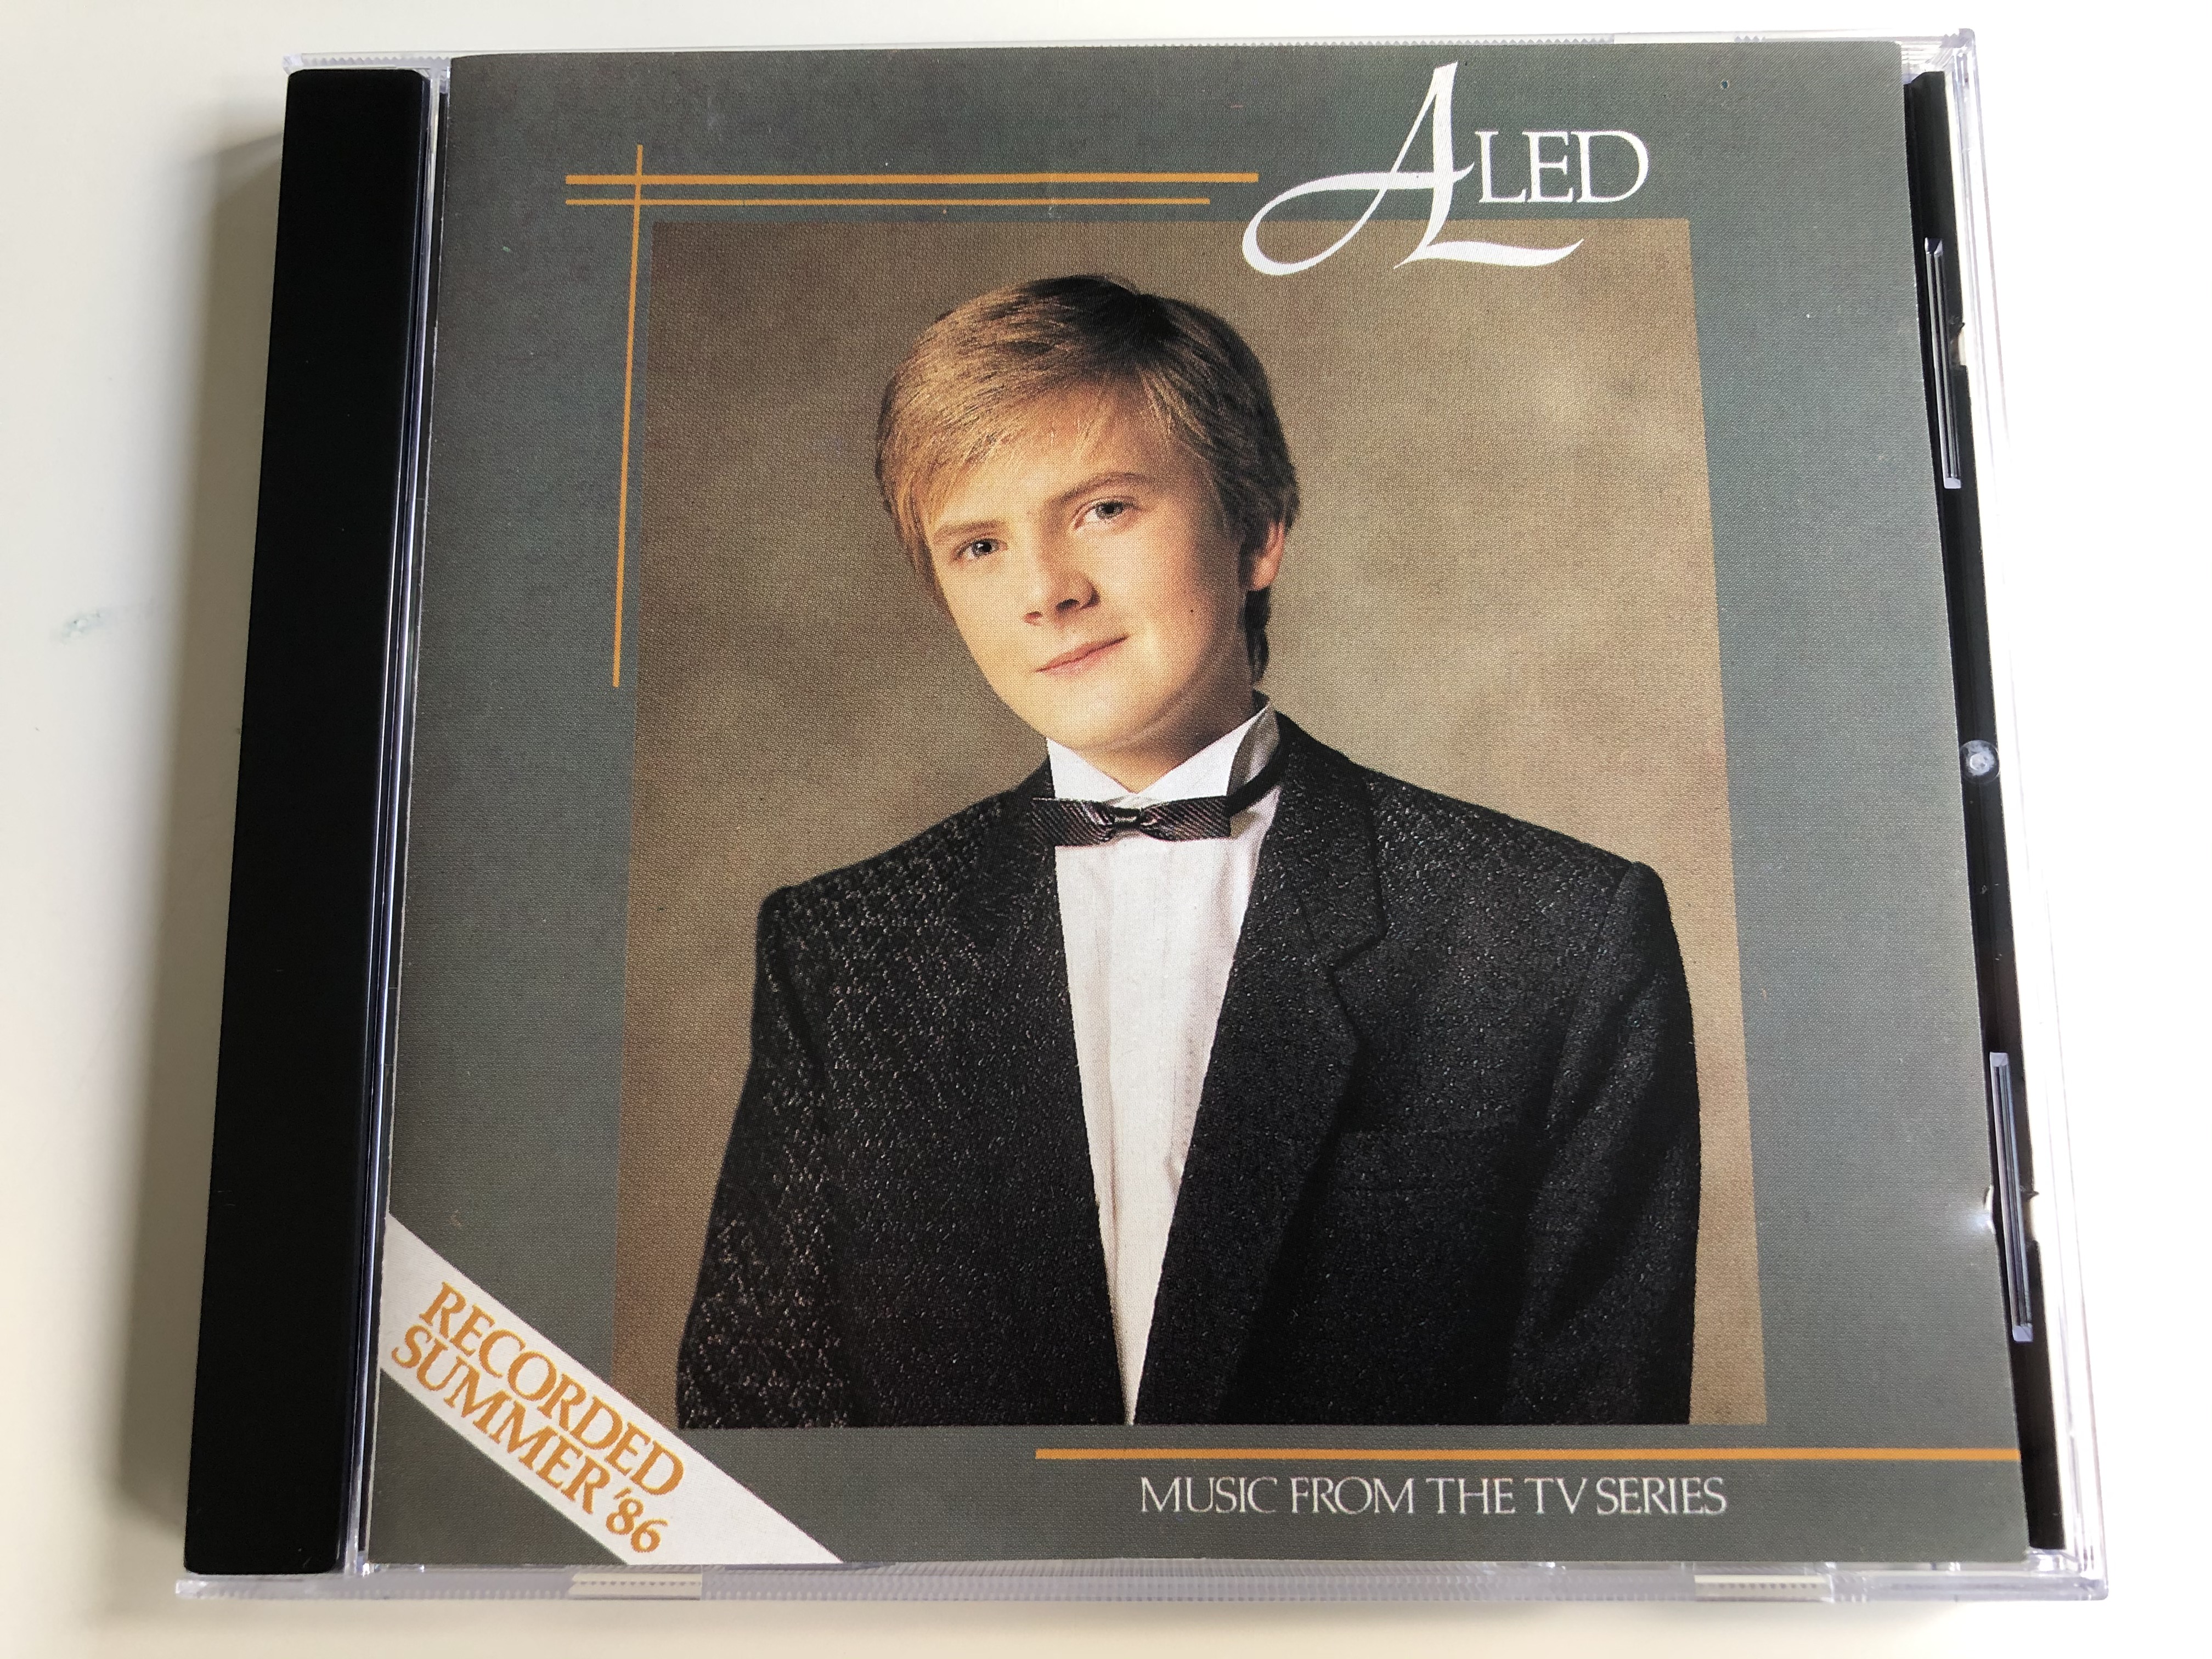 aled-music-from-the-tv-series-recorded-summer-86-10-records-audio-cd-1987-ajcd-3-1-.jpg